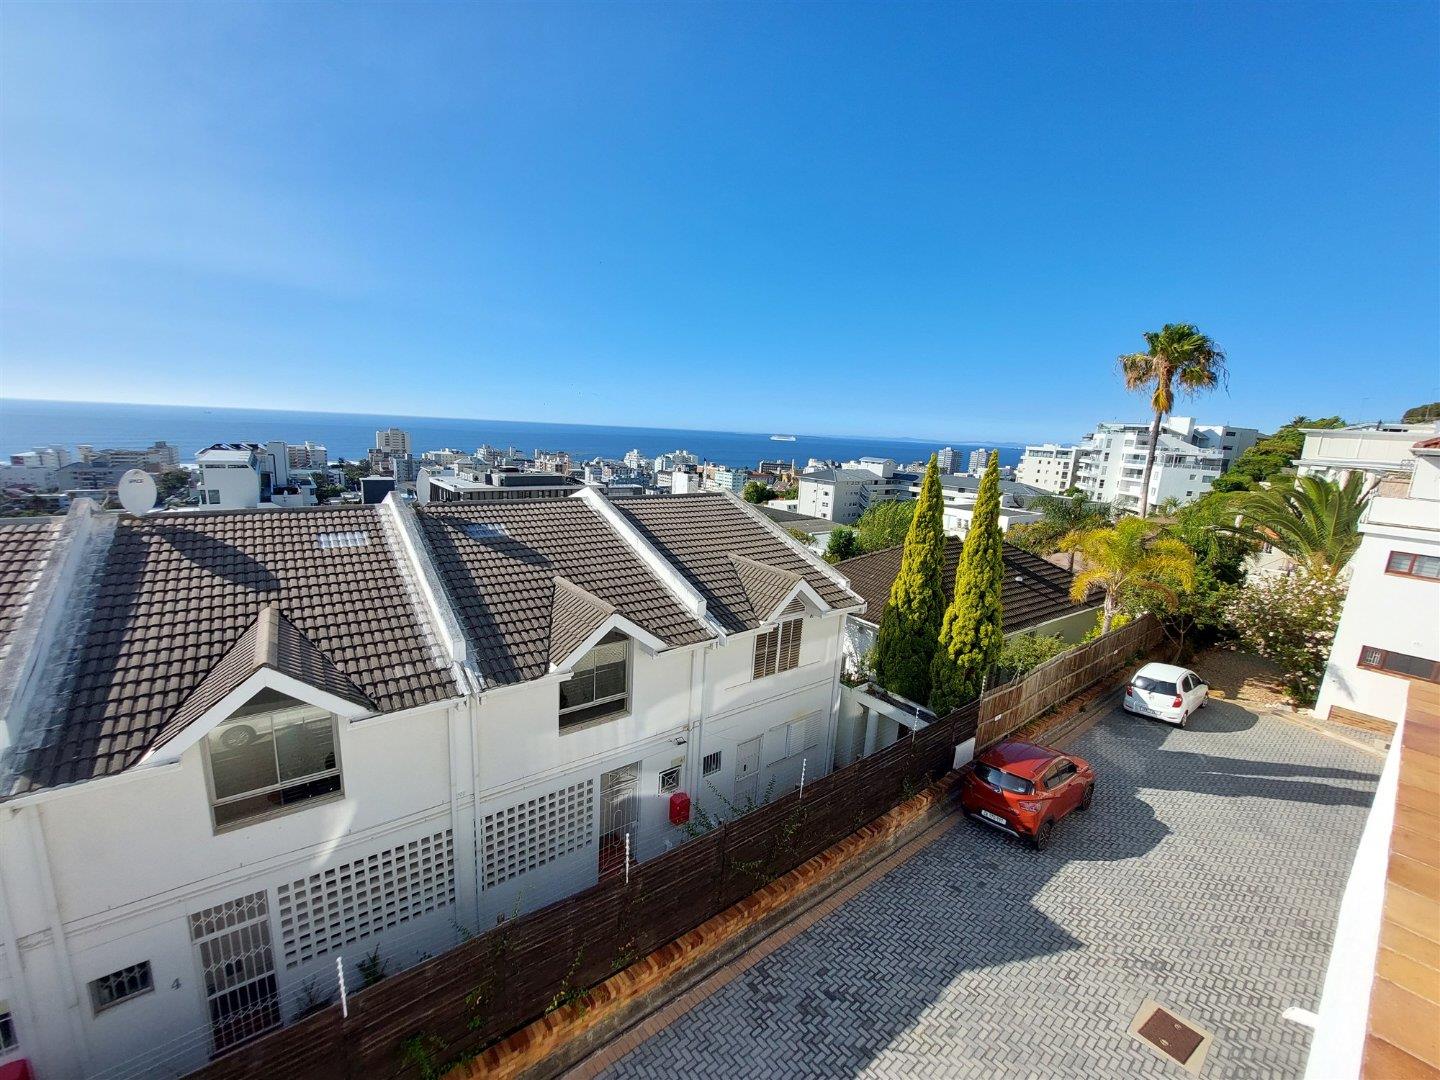 Weekly rental in Sea Point (minimum stay of 5 days)